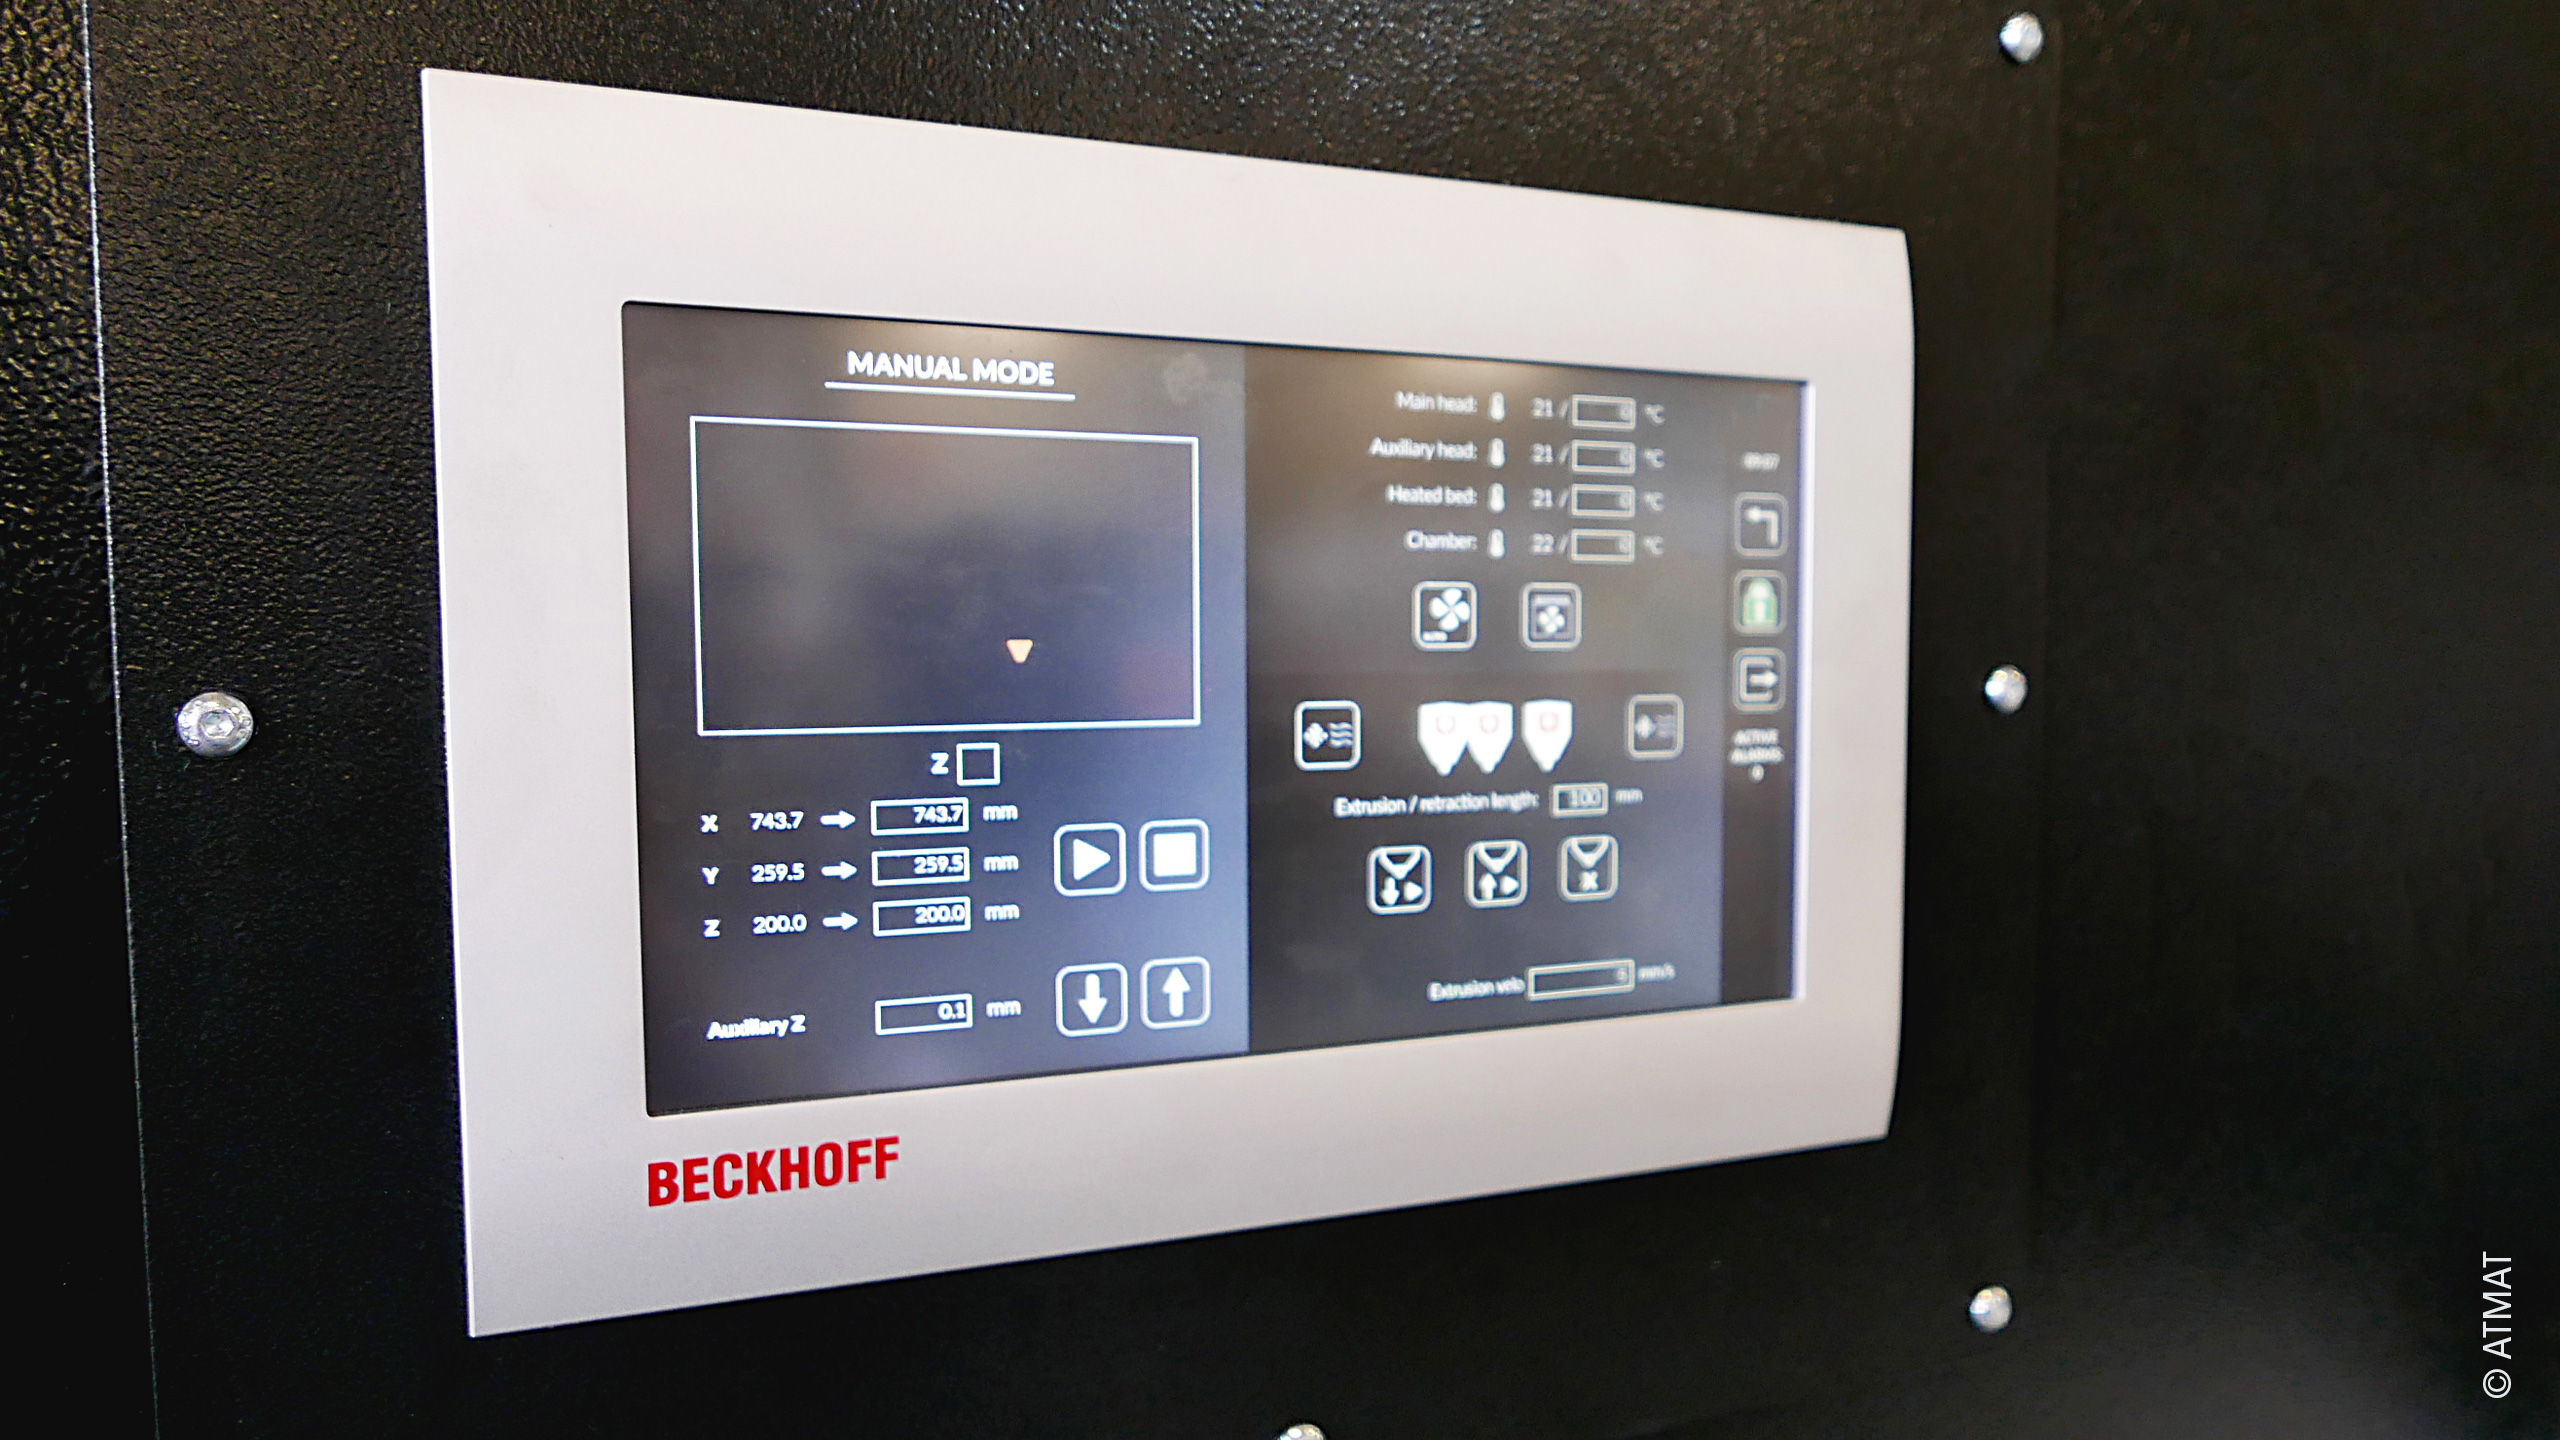 The integrated CP6700 Panel PC with TwinCAT HMI enables convenient operation of the 3D printer. 